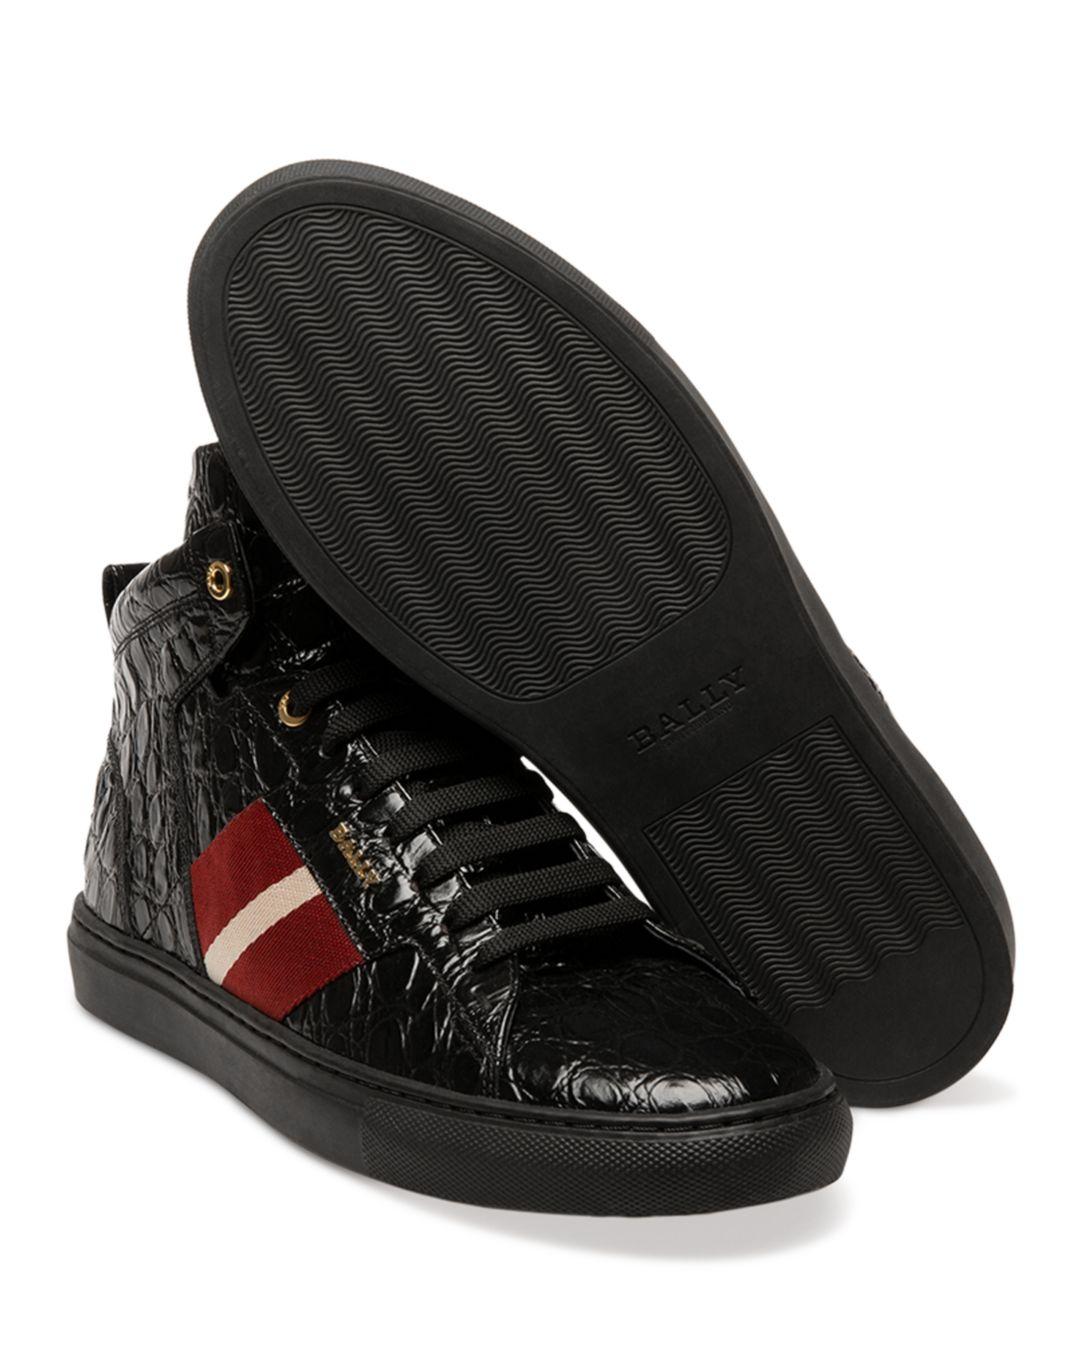 Bally Hexton Leather Sneakers in Black for Men - Lyst